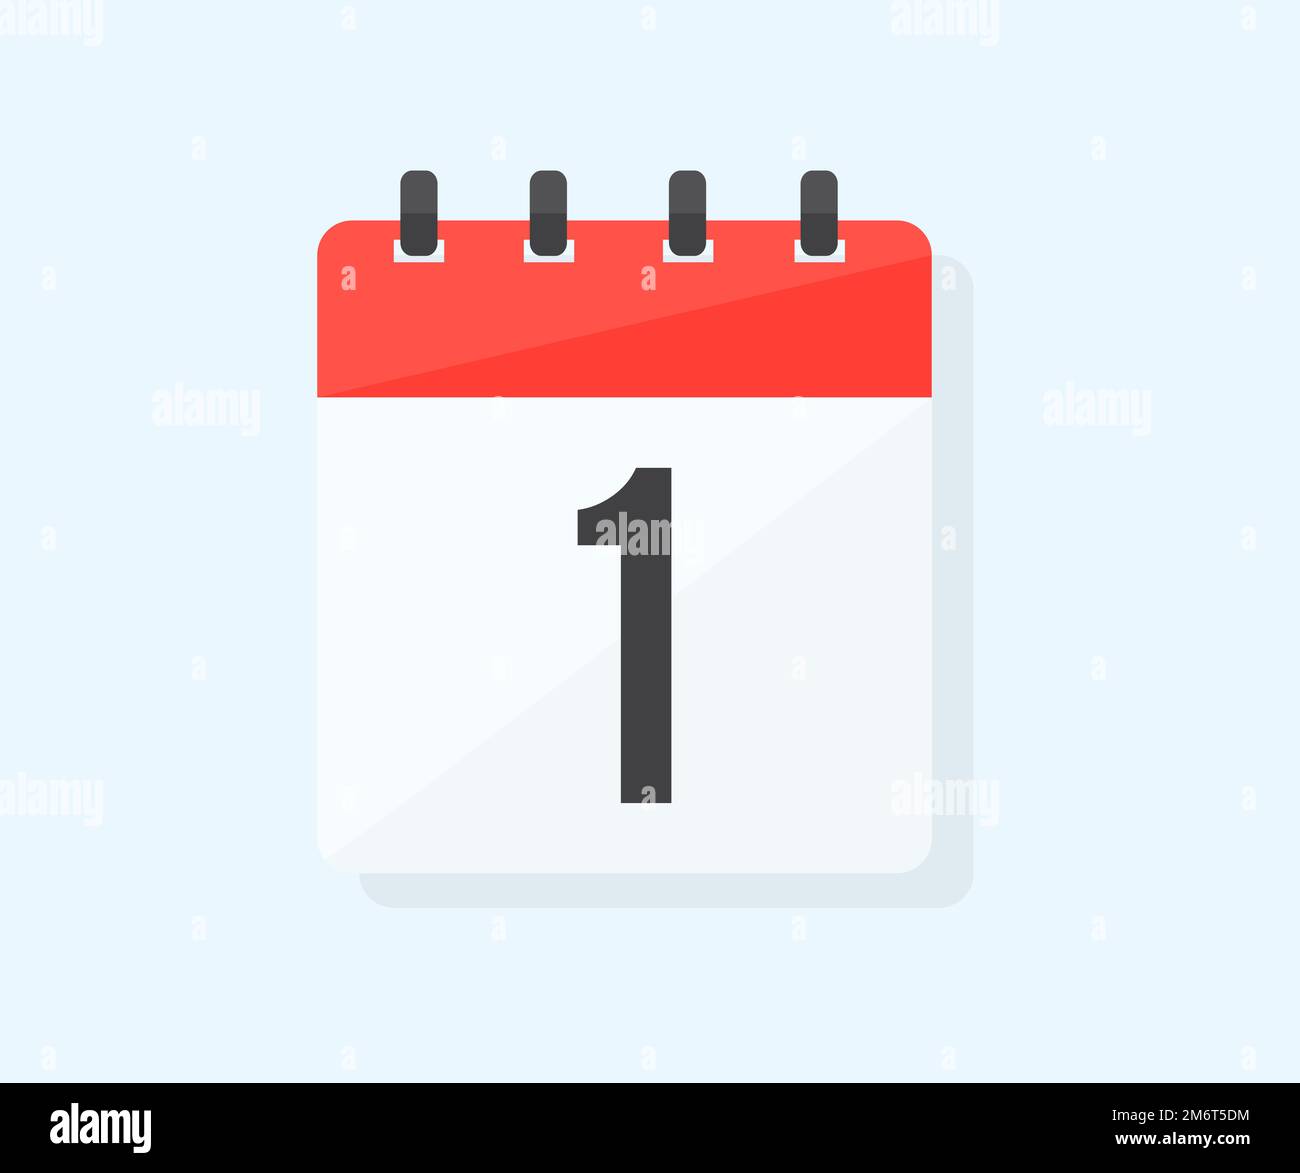 The first day of the month with date 1, day one logo design. Calendar icon flat day 1. Reminder symbol. Event schedule date. Schedule planning. Stock Vector